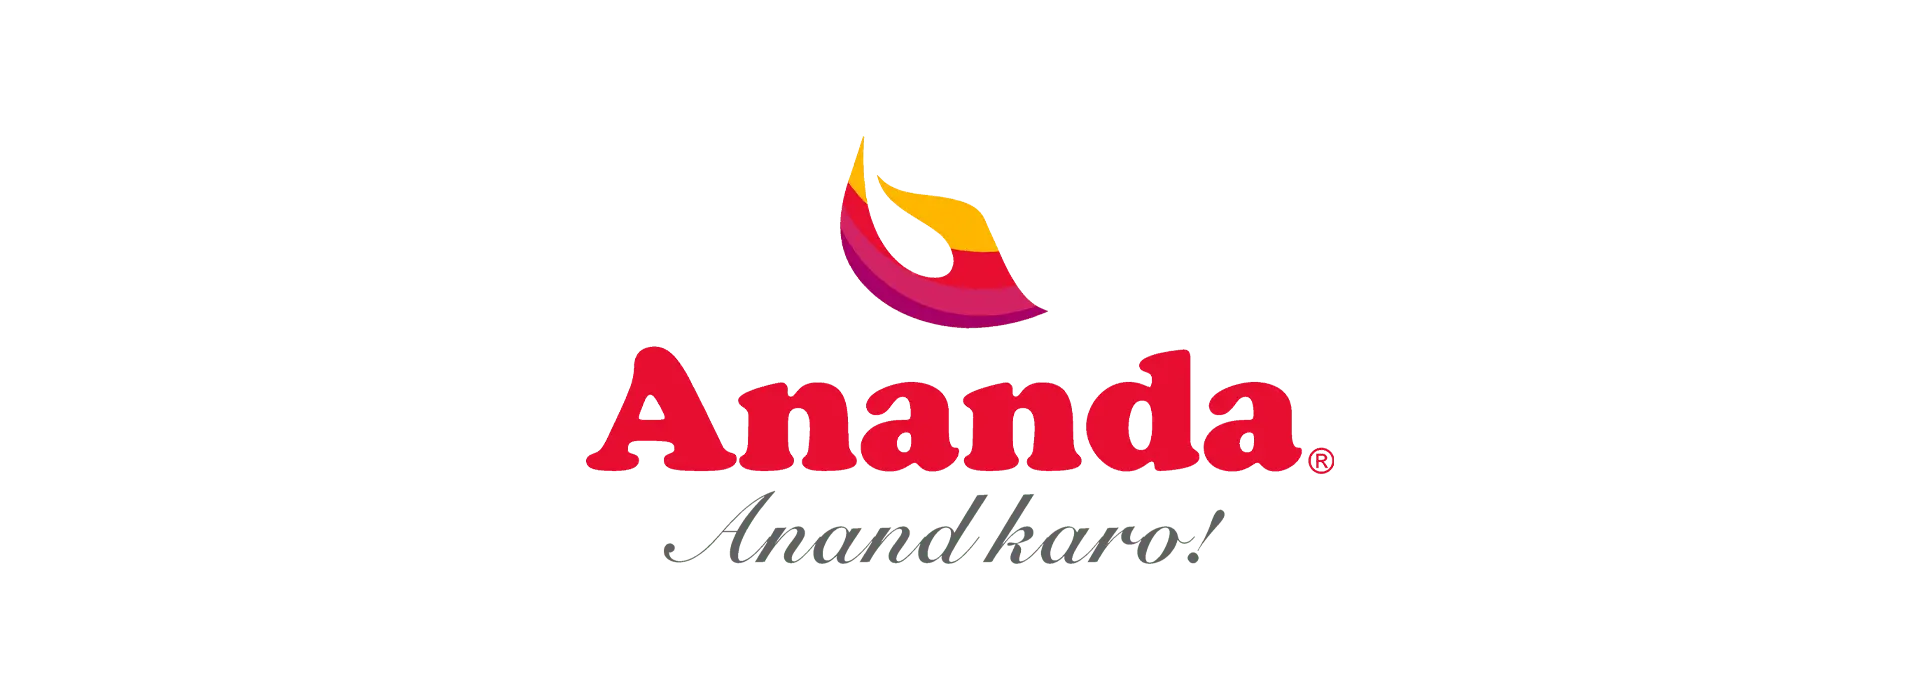 Ananda commits to better Dairy Welfare and joins others in embracing responsible sourcing